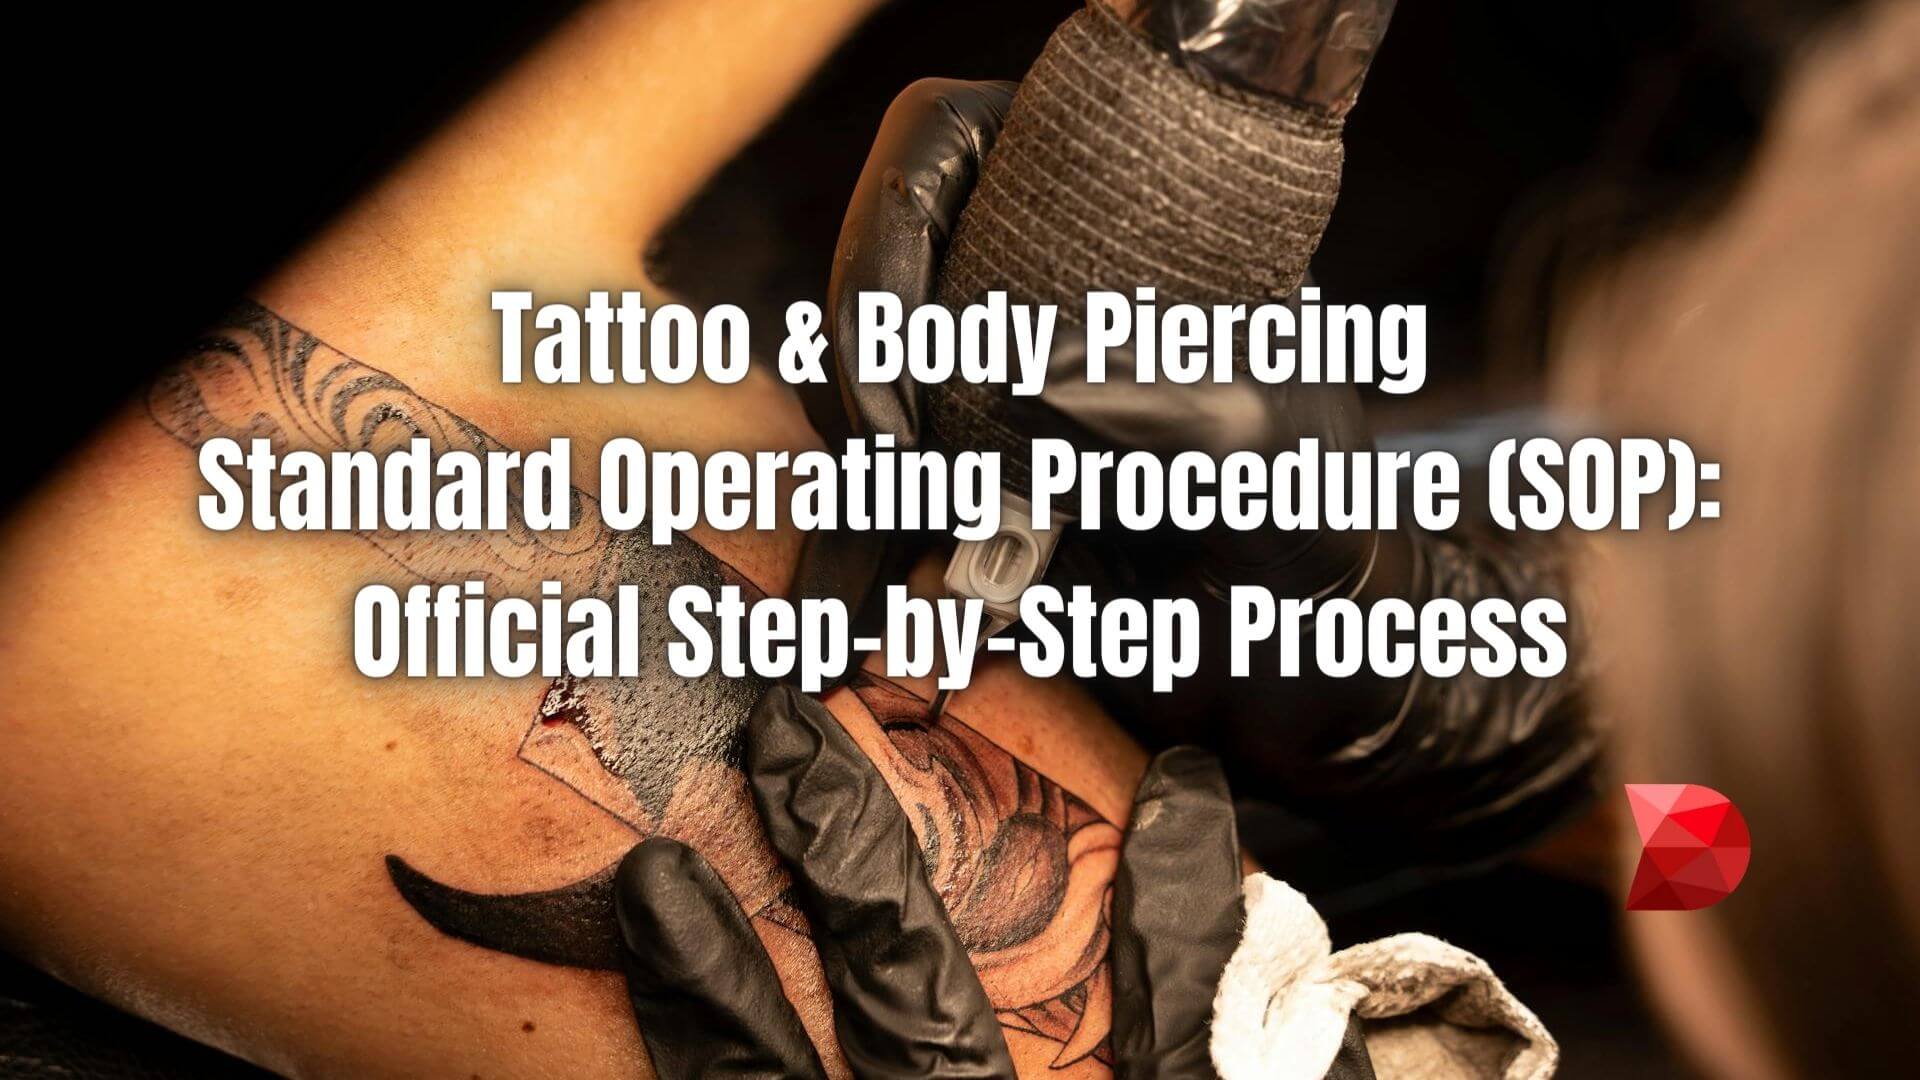 Unlock the secrets of tattoo & body piercing standard operating procedures. Learn the process for process for safety and precision.